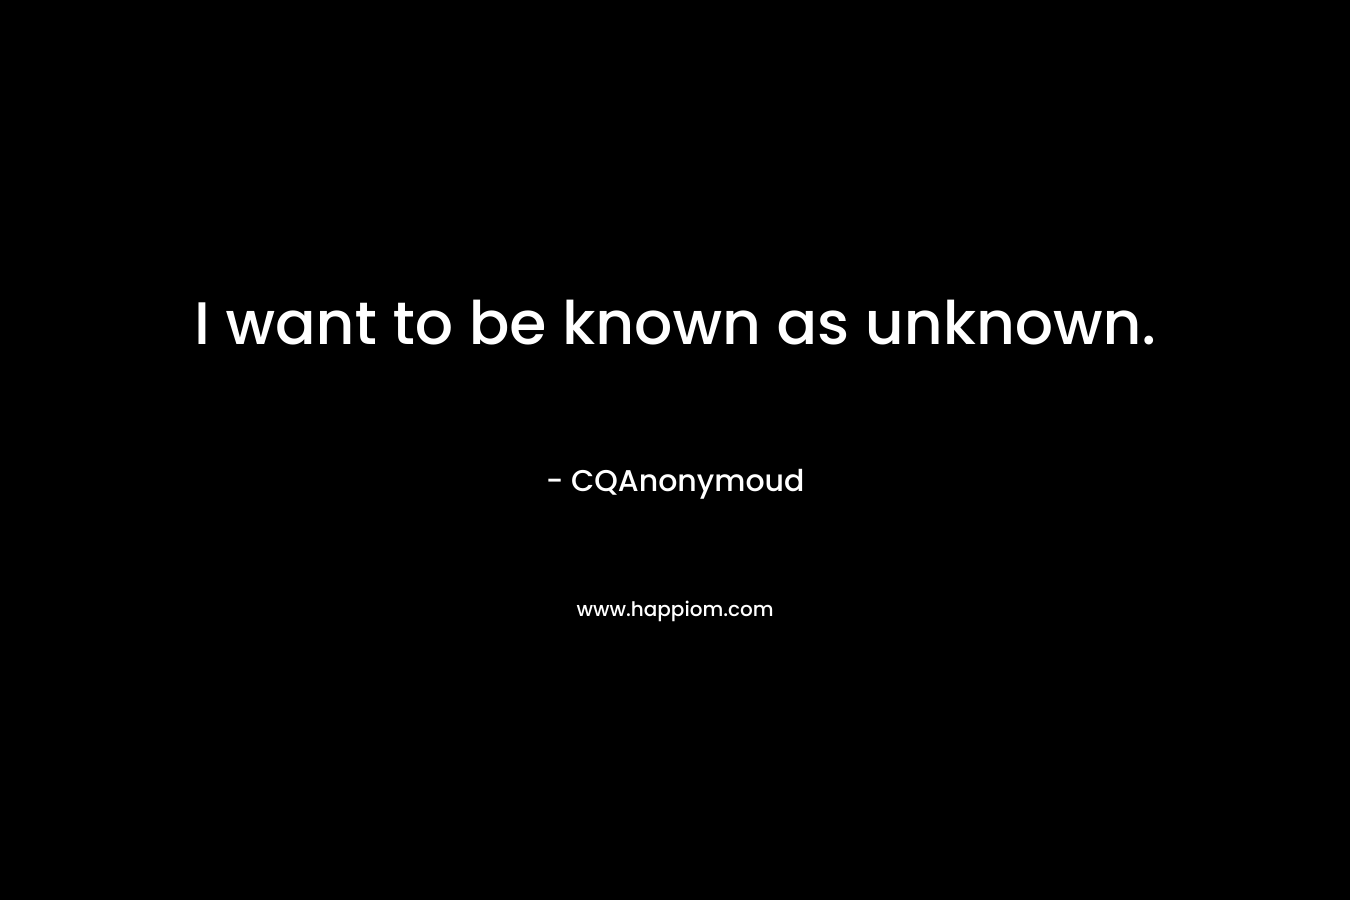 I want to be known as unknown. – CQAnonymoud